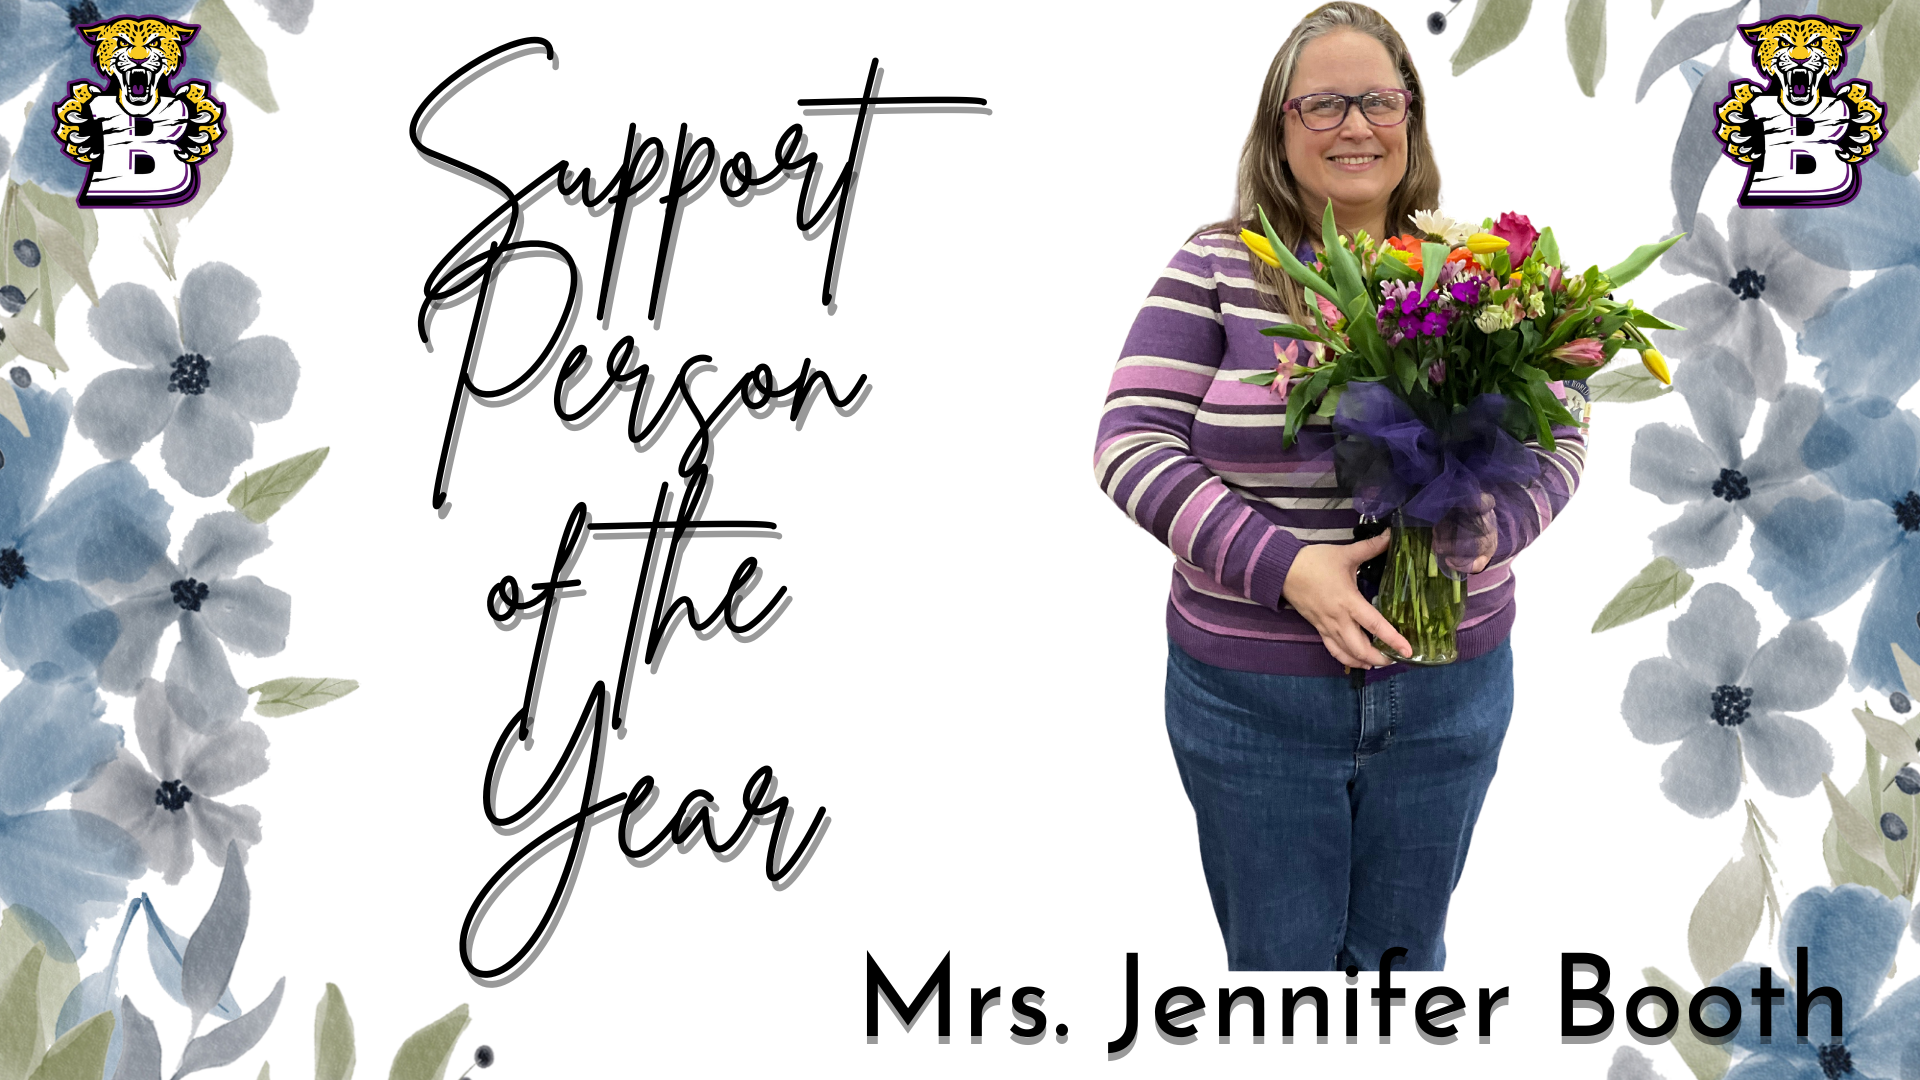 Support Staff of the Year - Roxanne Bearden